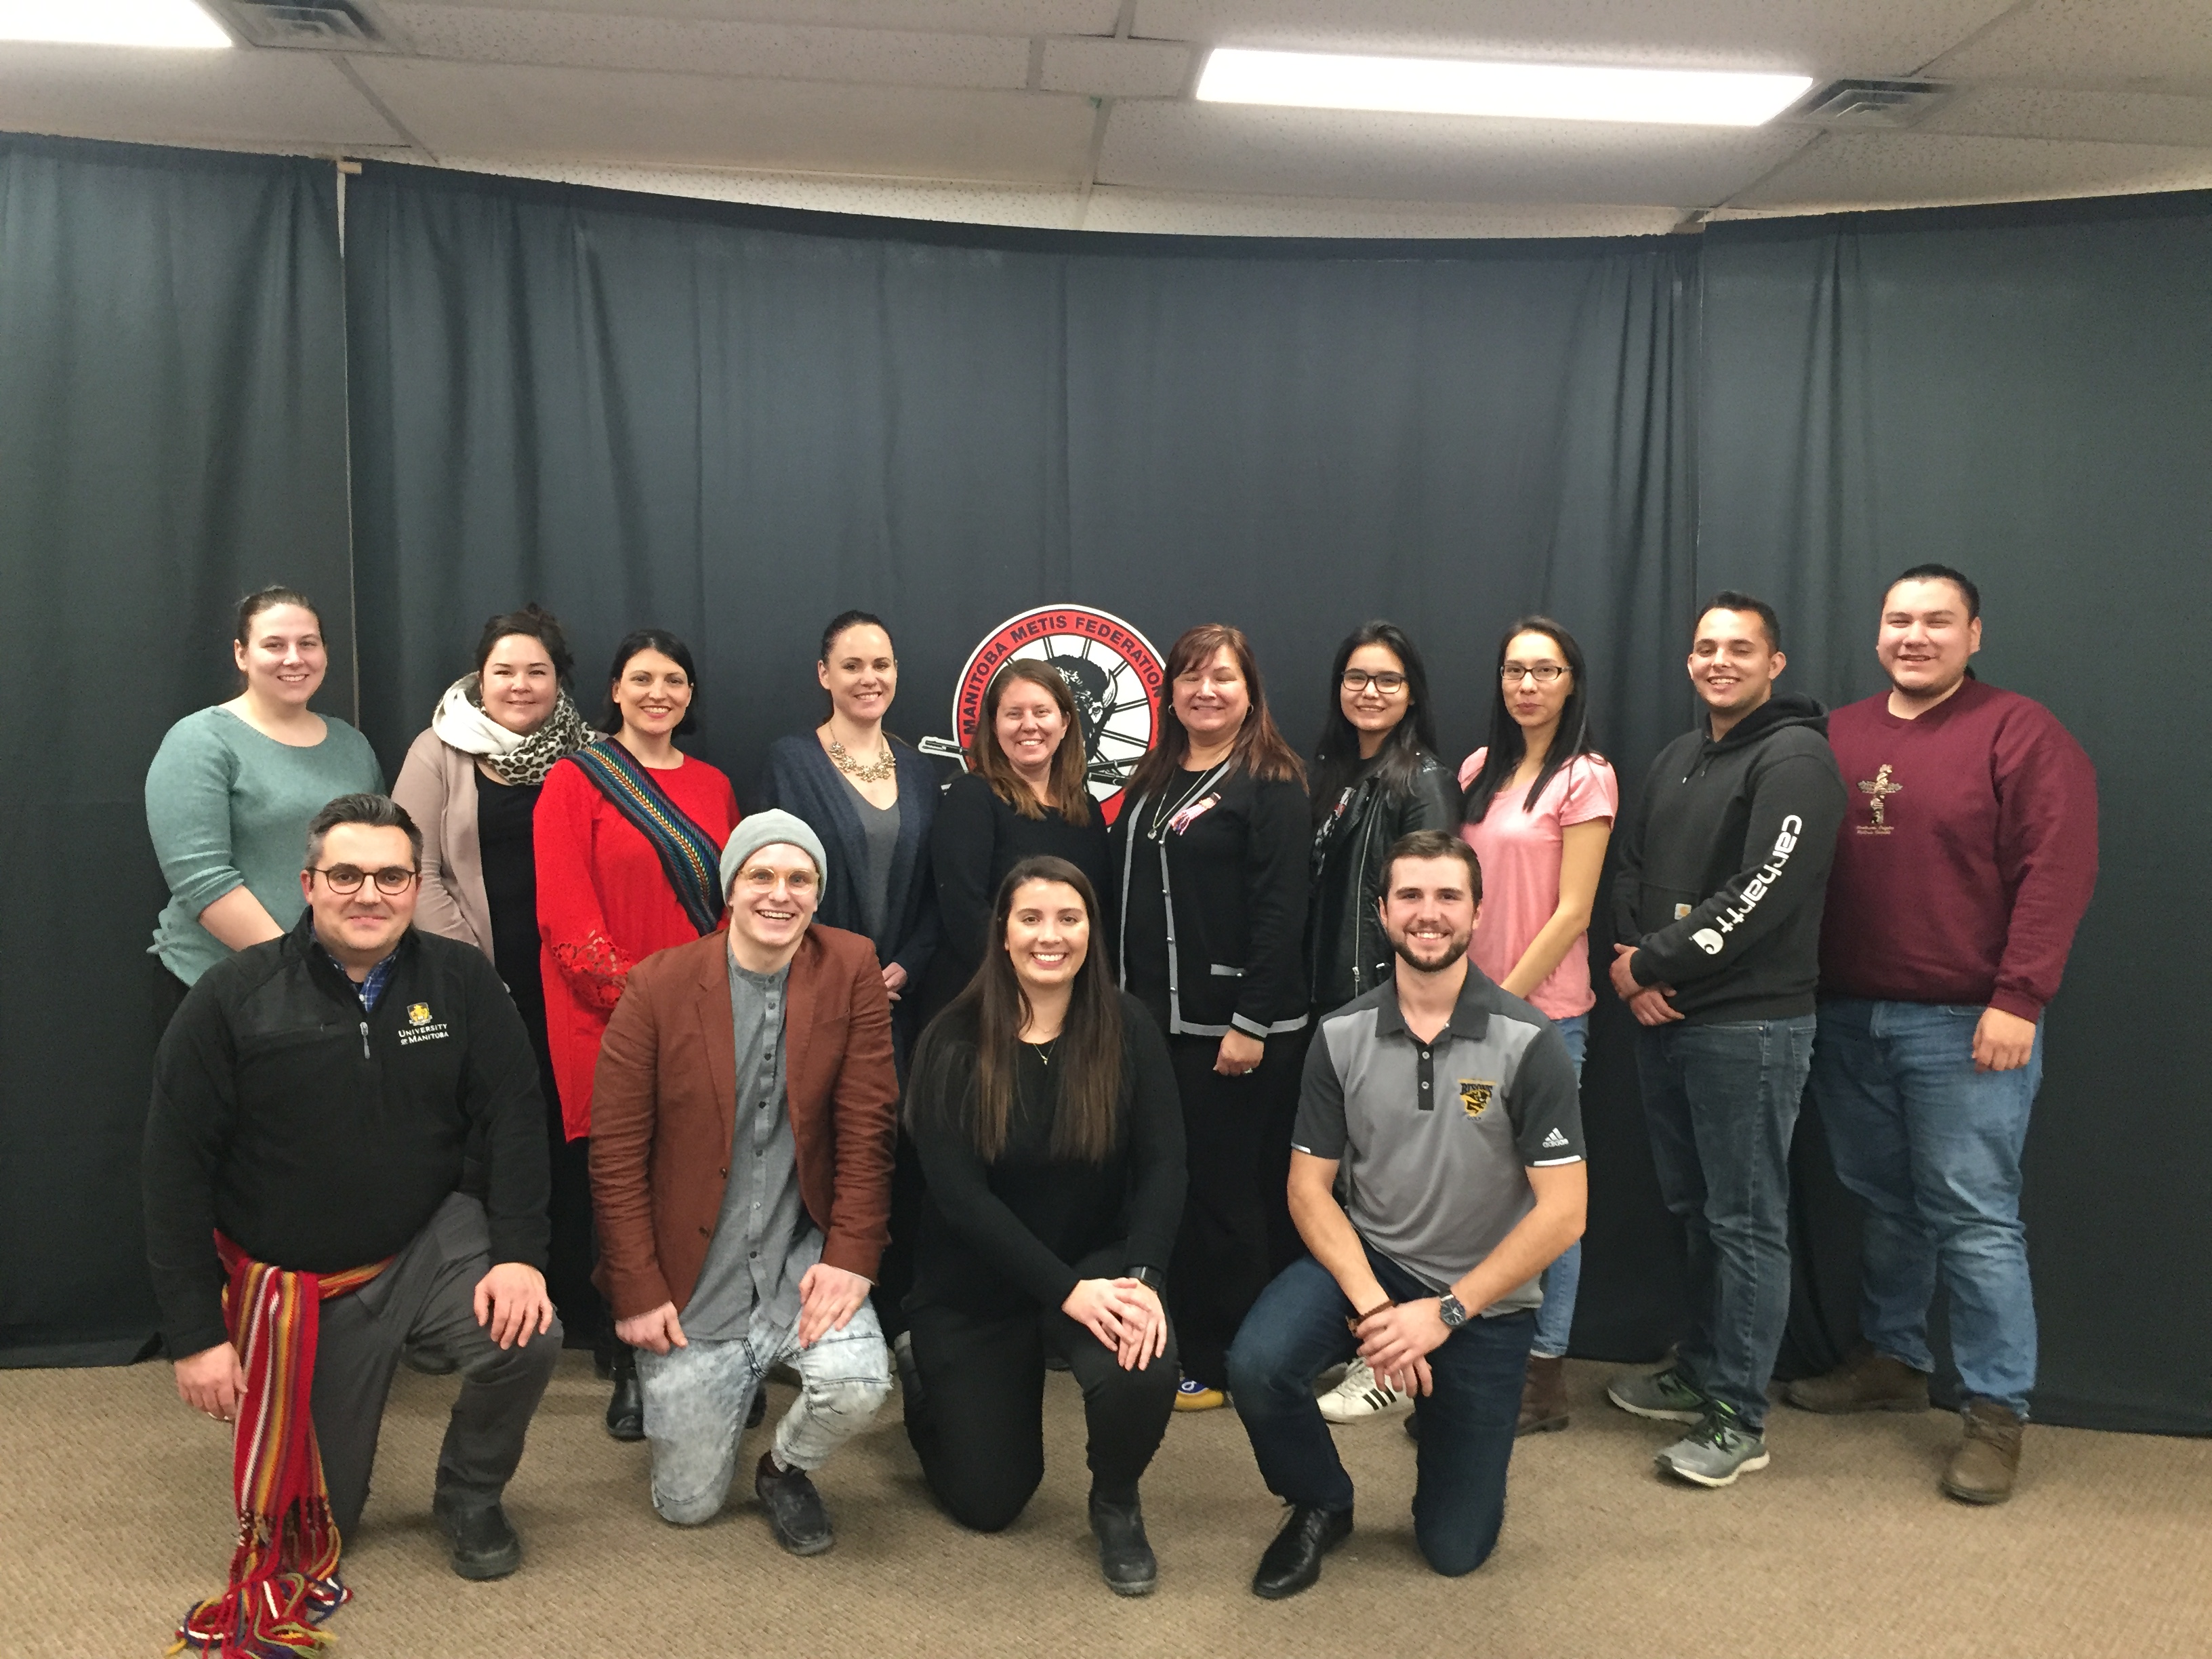 3.	ICE at the Manitoba Metis Federation Home Office meeting with Minister Anita Campbell, Minister of Finance & Human Resource, MMF, and Spokesperson for the Infinity Women Secretariat.